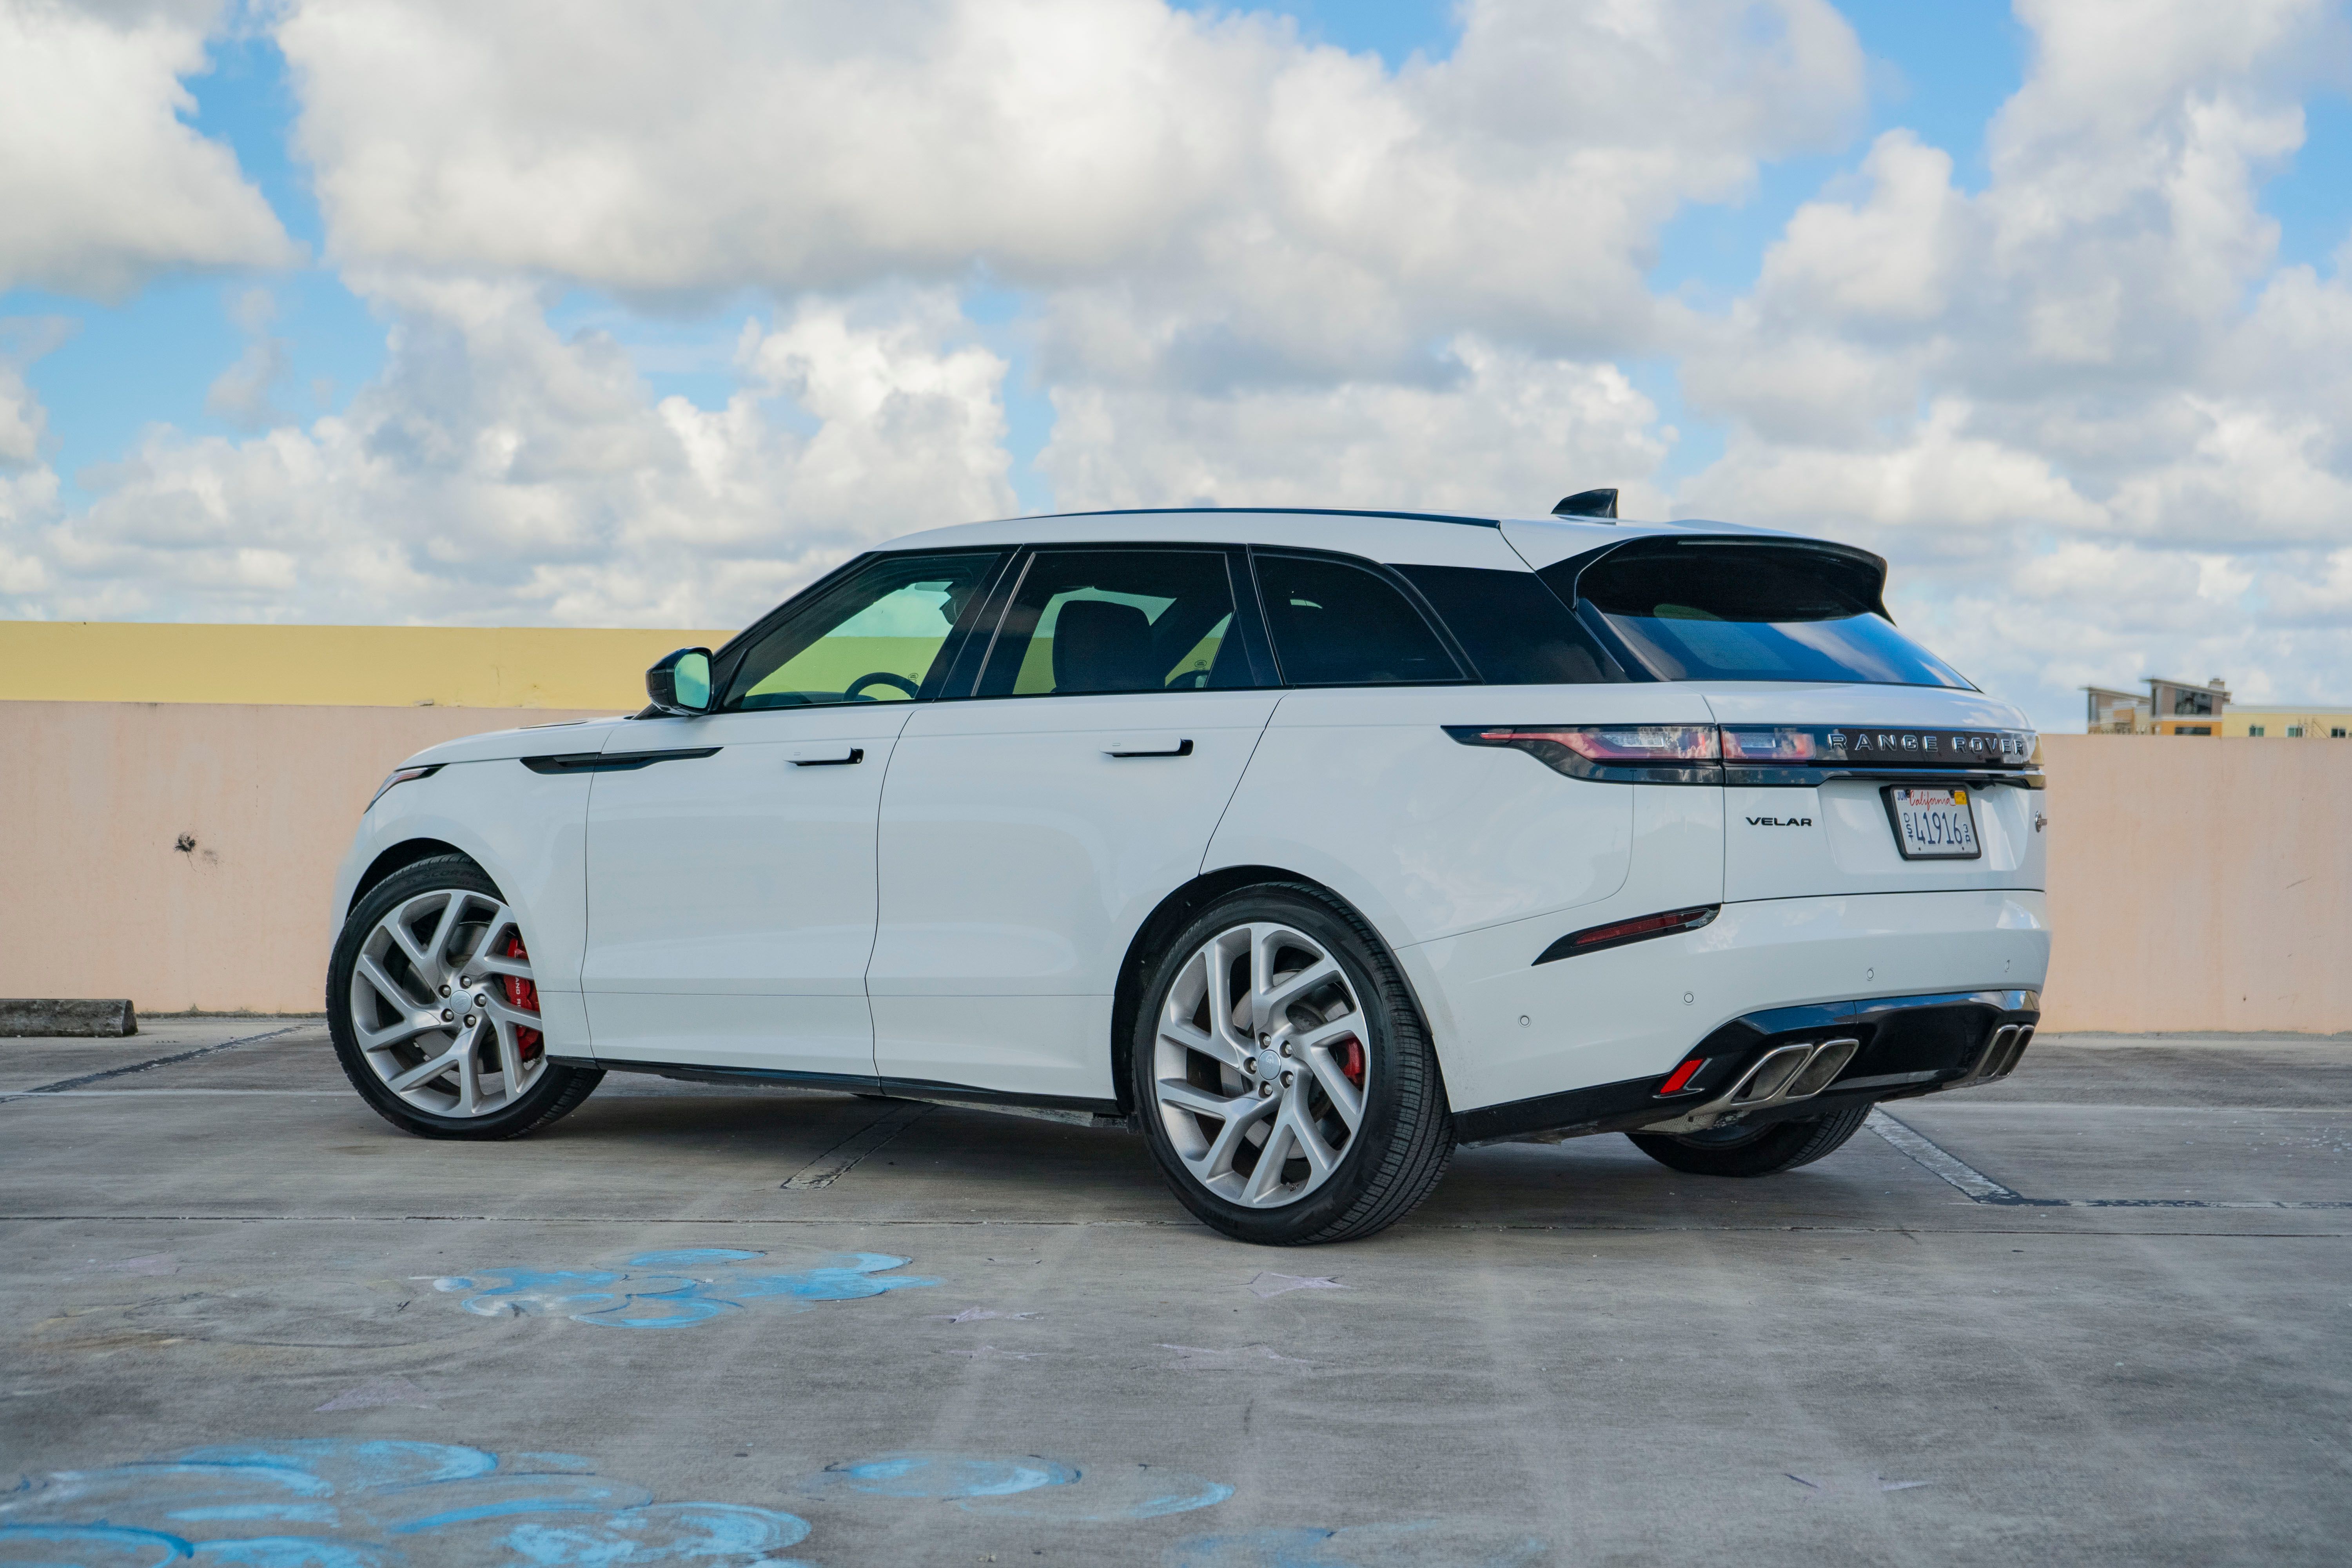 2022 - 2022 Test Drive: The Range Rover Velar Is Painfully Under-Appreciated 